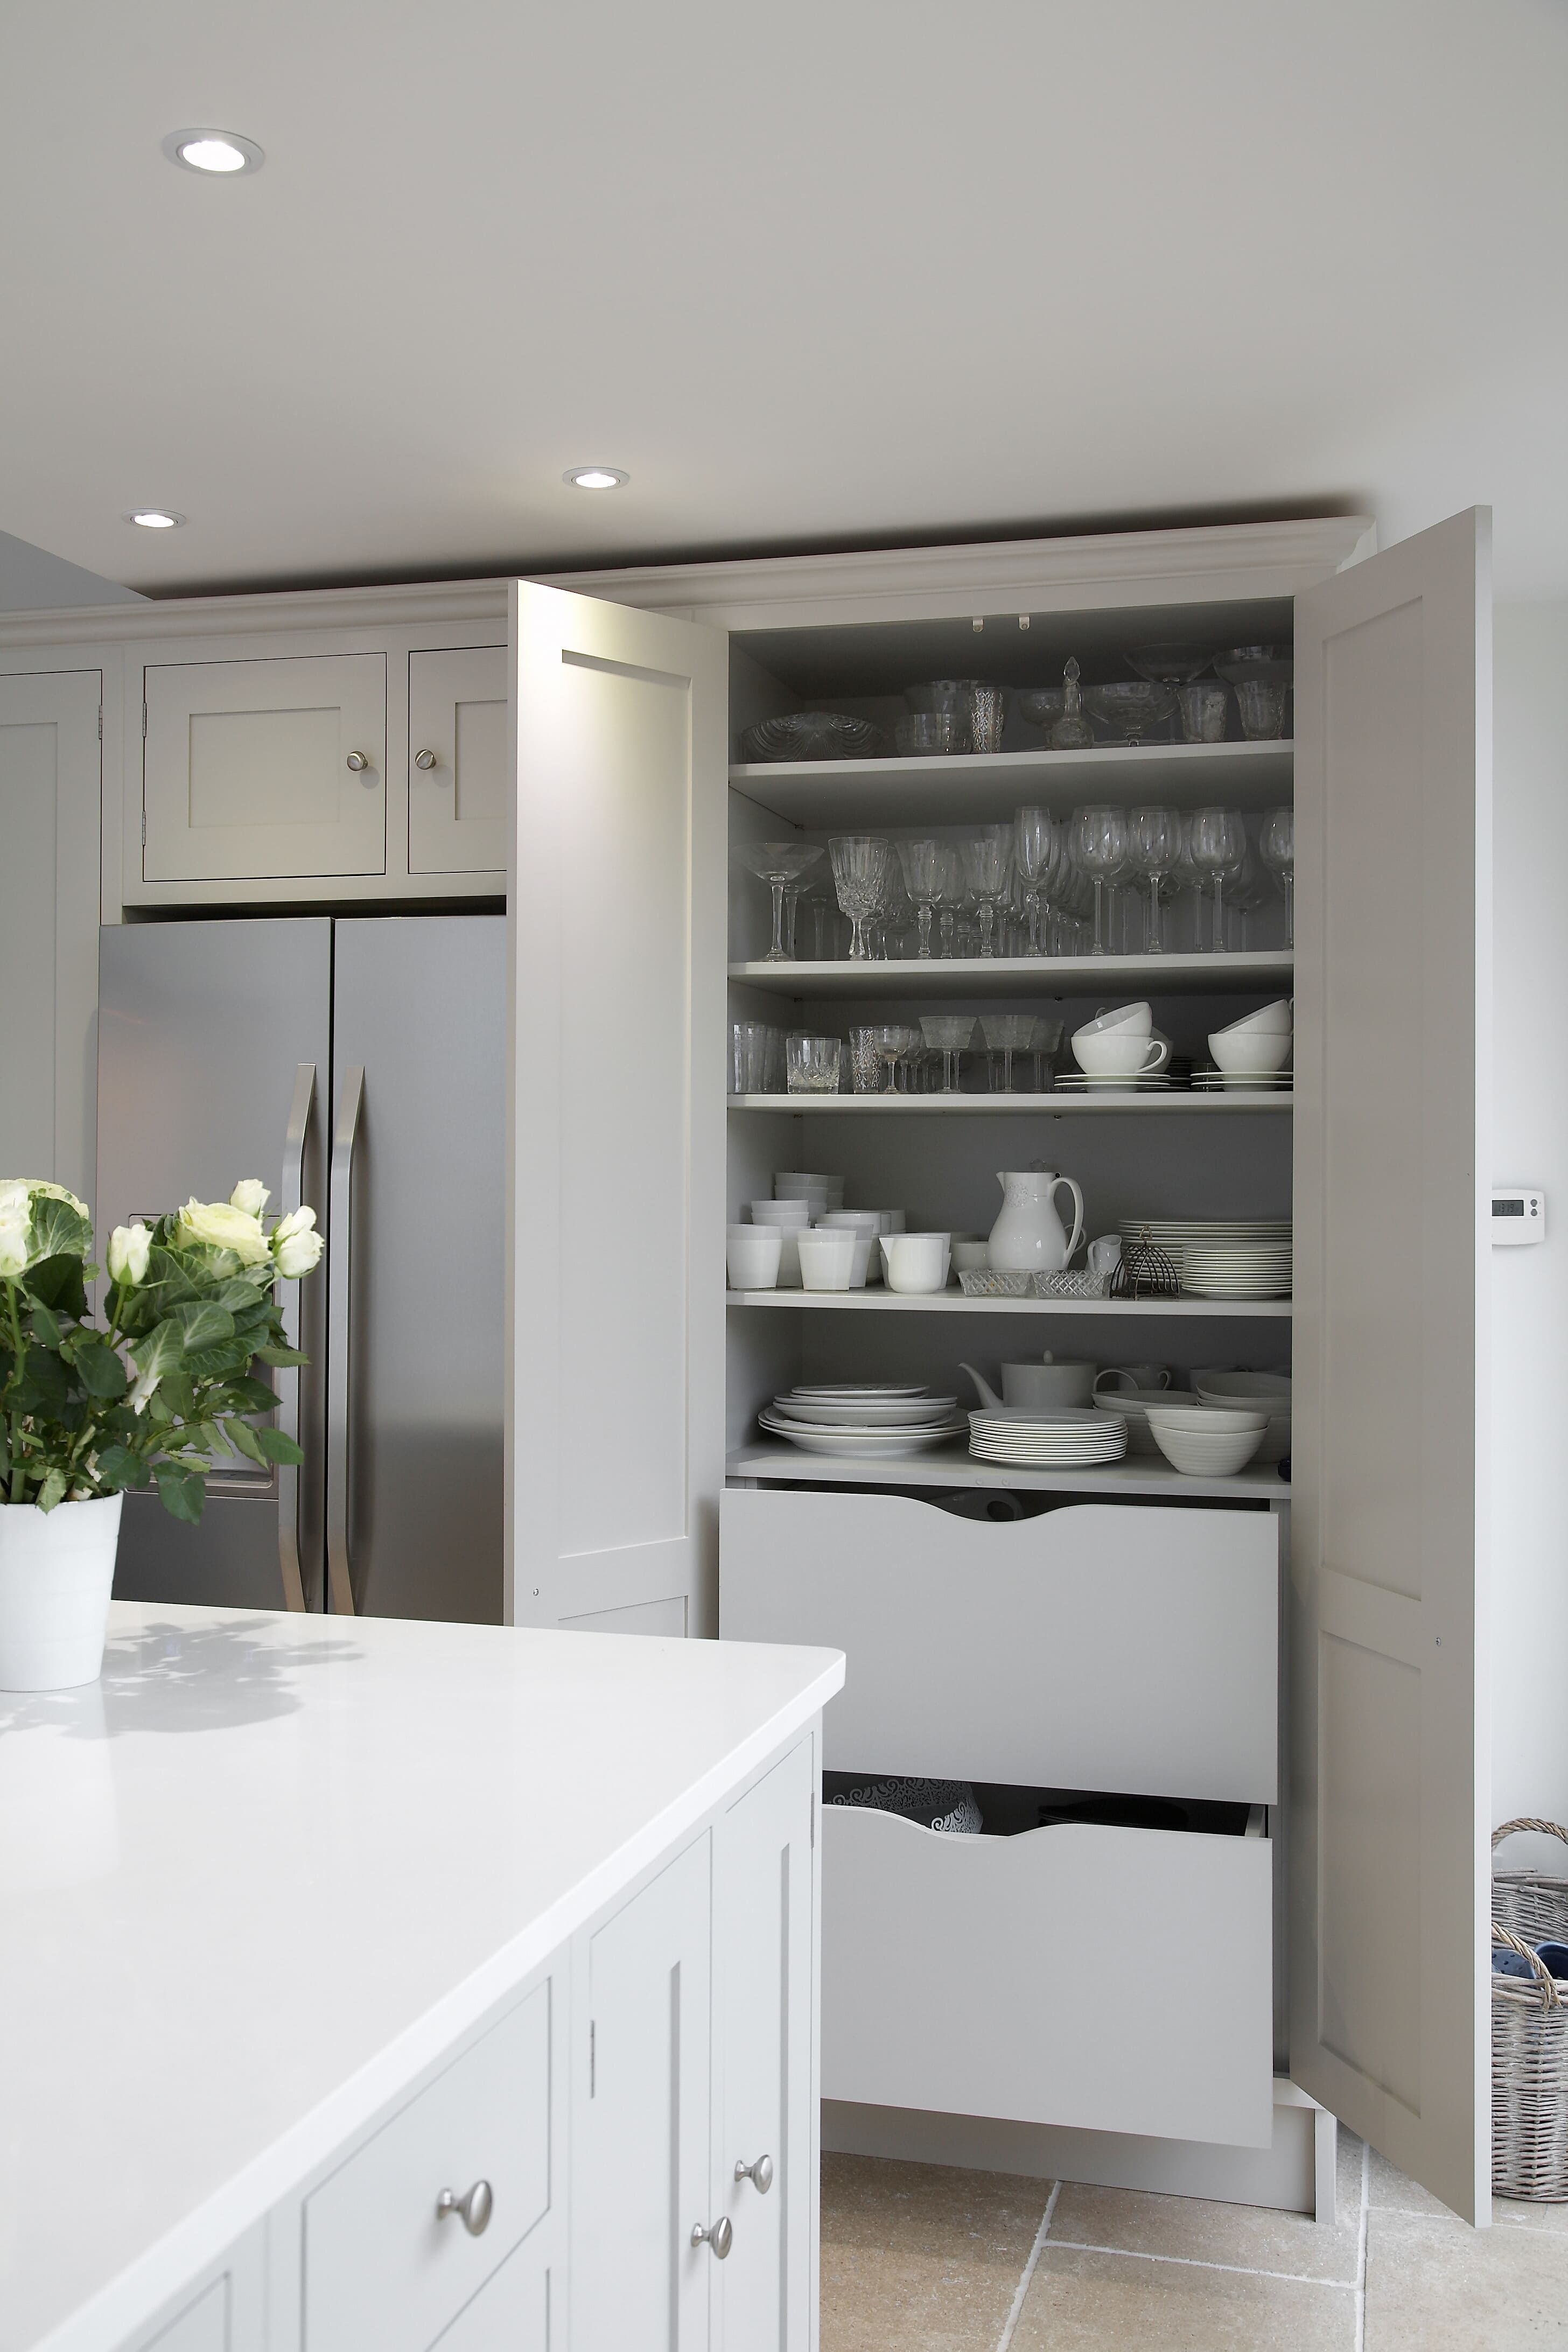 A modern kitchen pantry open to reveal neatly organised shelves with glassware, dishes, and bowls. The cabinetry is painted in a soft grey, and the handles are a classic style in brushed metal. 